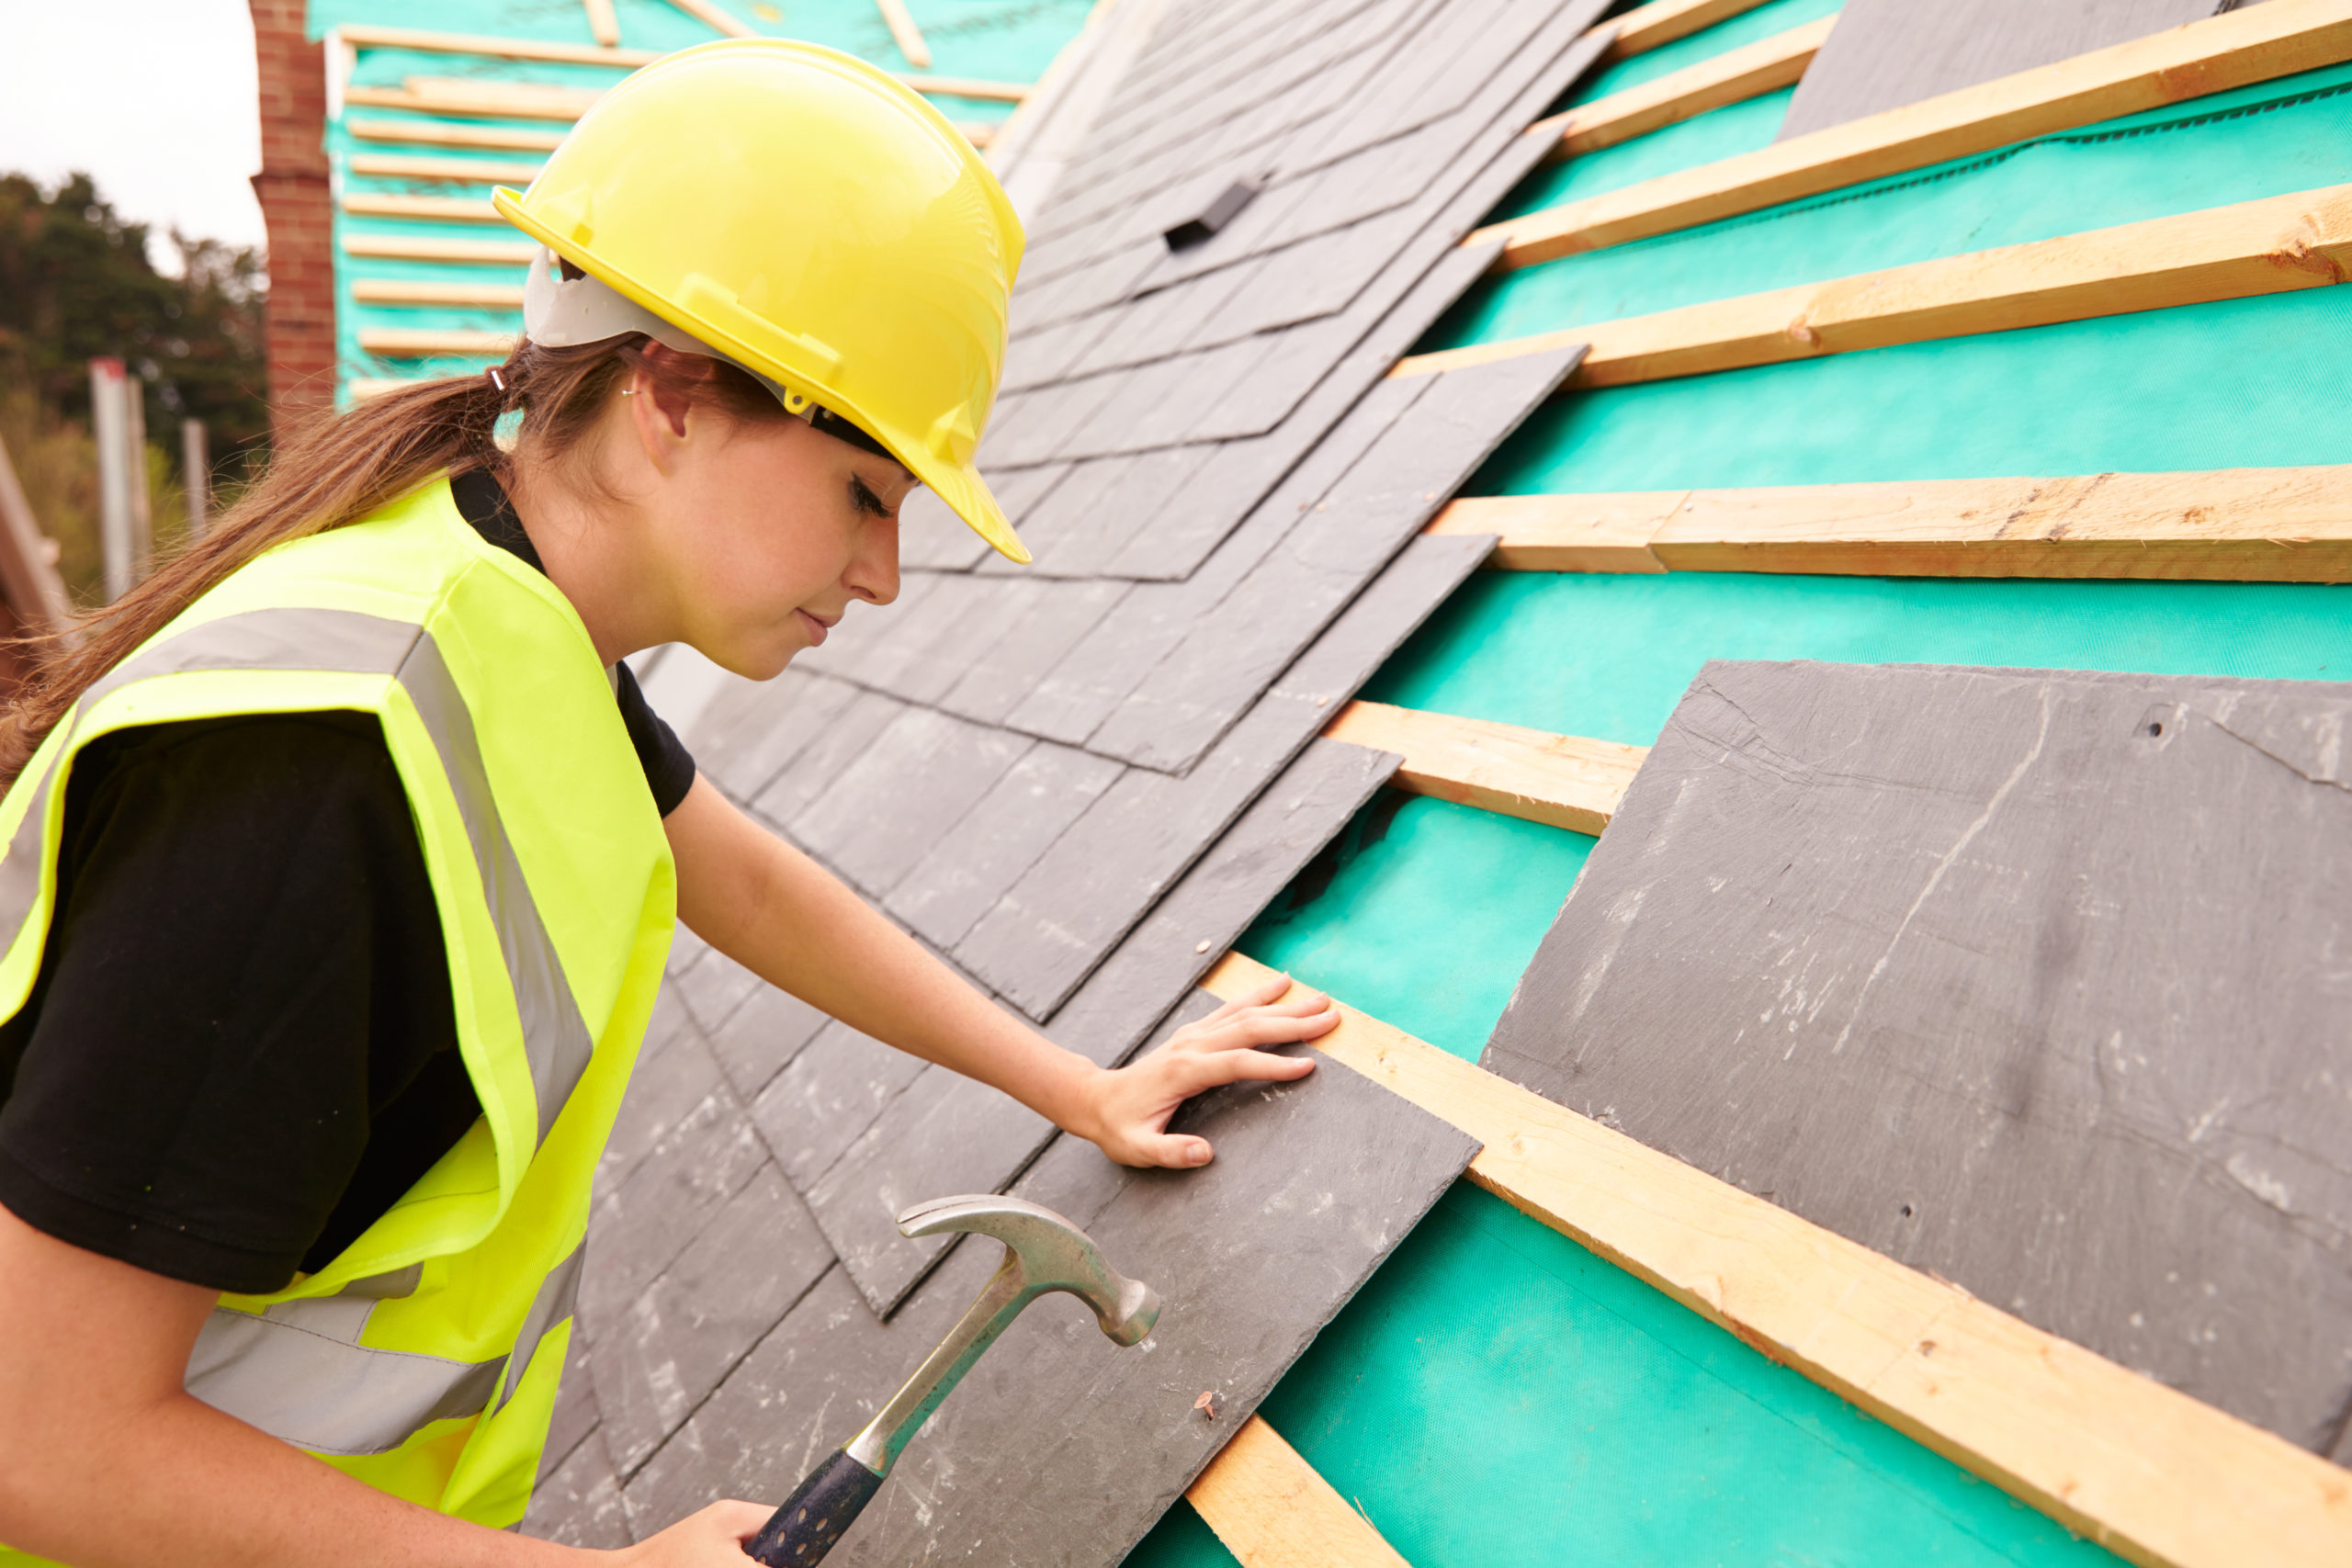 Kanga Roof Utah Professional Roofing Repairs Questions to ask before hiring a roofer